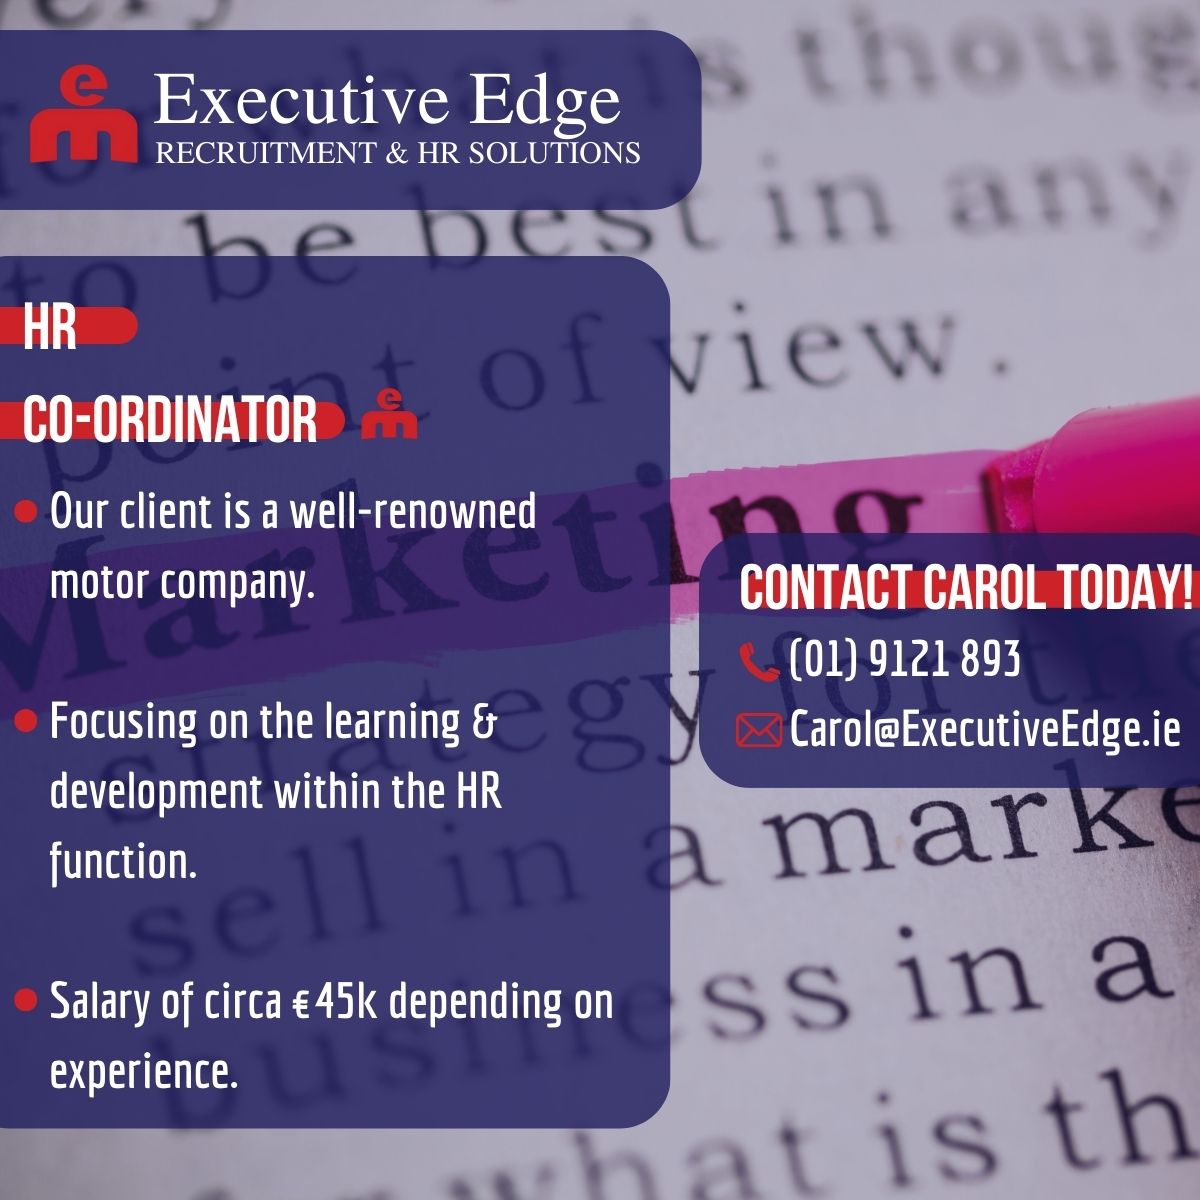 Carol has an excellent opportunity currently open for someone wanting to pursue a career in HR. Contact Carol today to chat about this role!
Or, find out more at: executiveedge.ie/job/hr-l-d-co-…
#DublinJobs